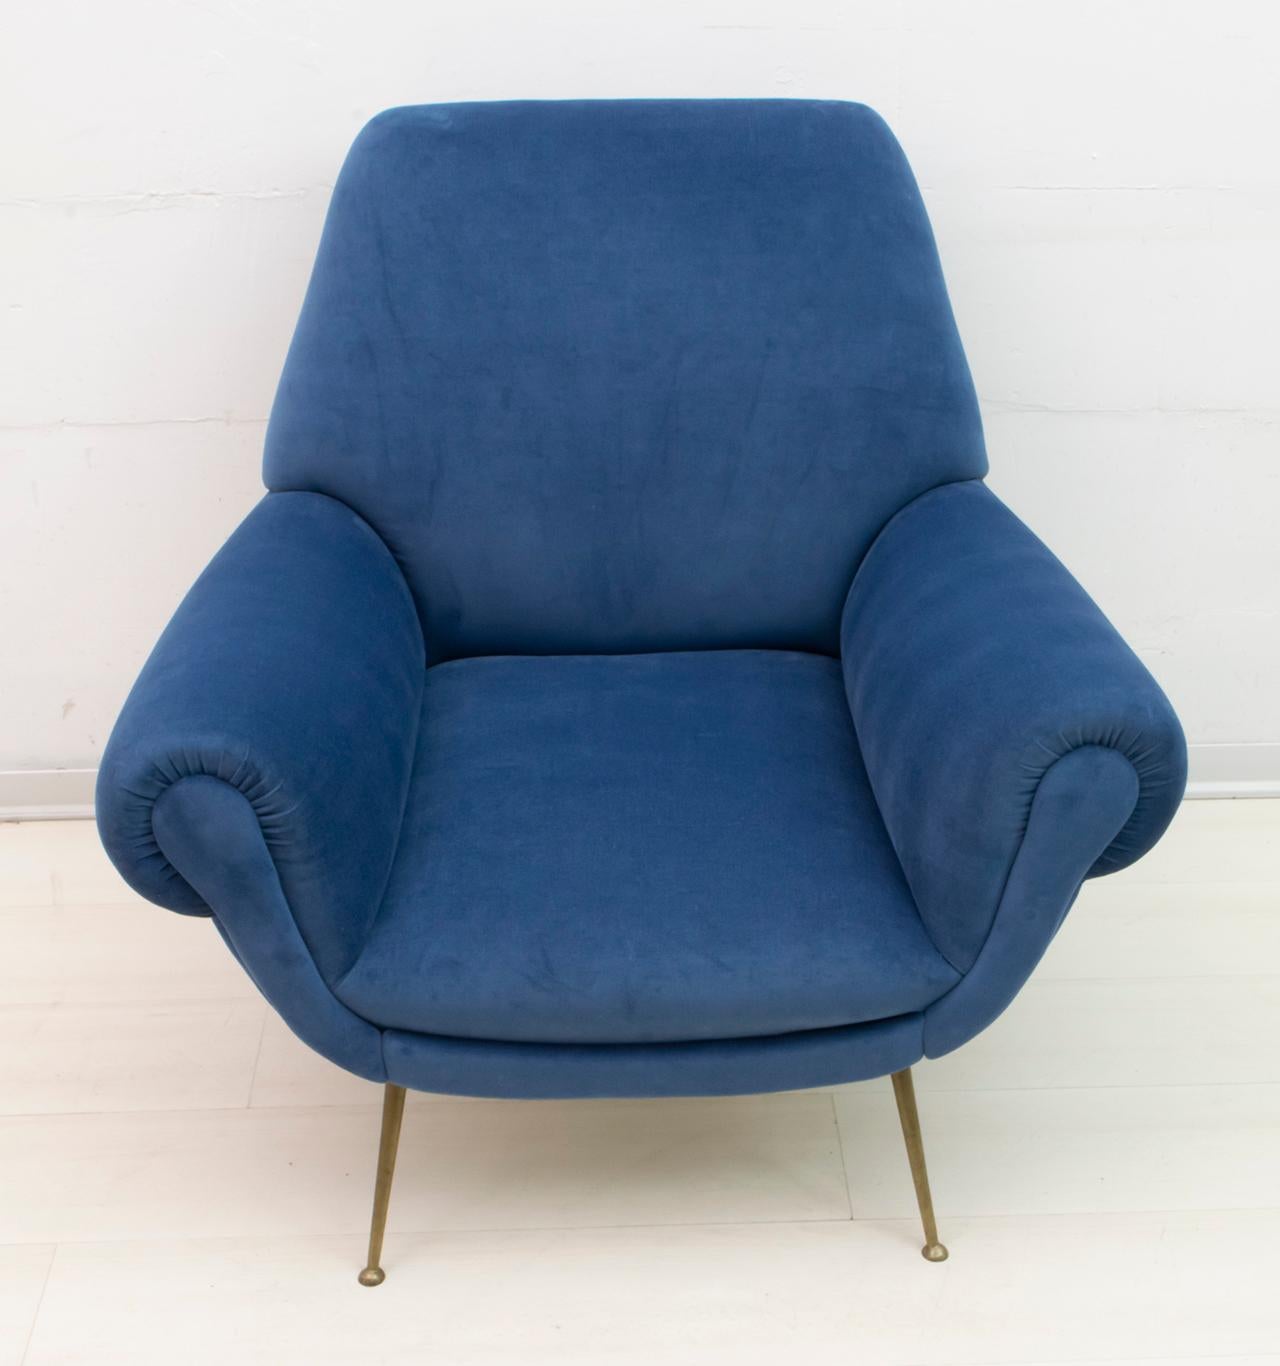 Armchair designed by Gigi Radice for Minotti. Made with solid wood structure and blue velvet covering and polished brass legs. The armchair is authentic, only the upholstery has been replaced.